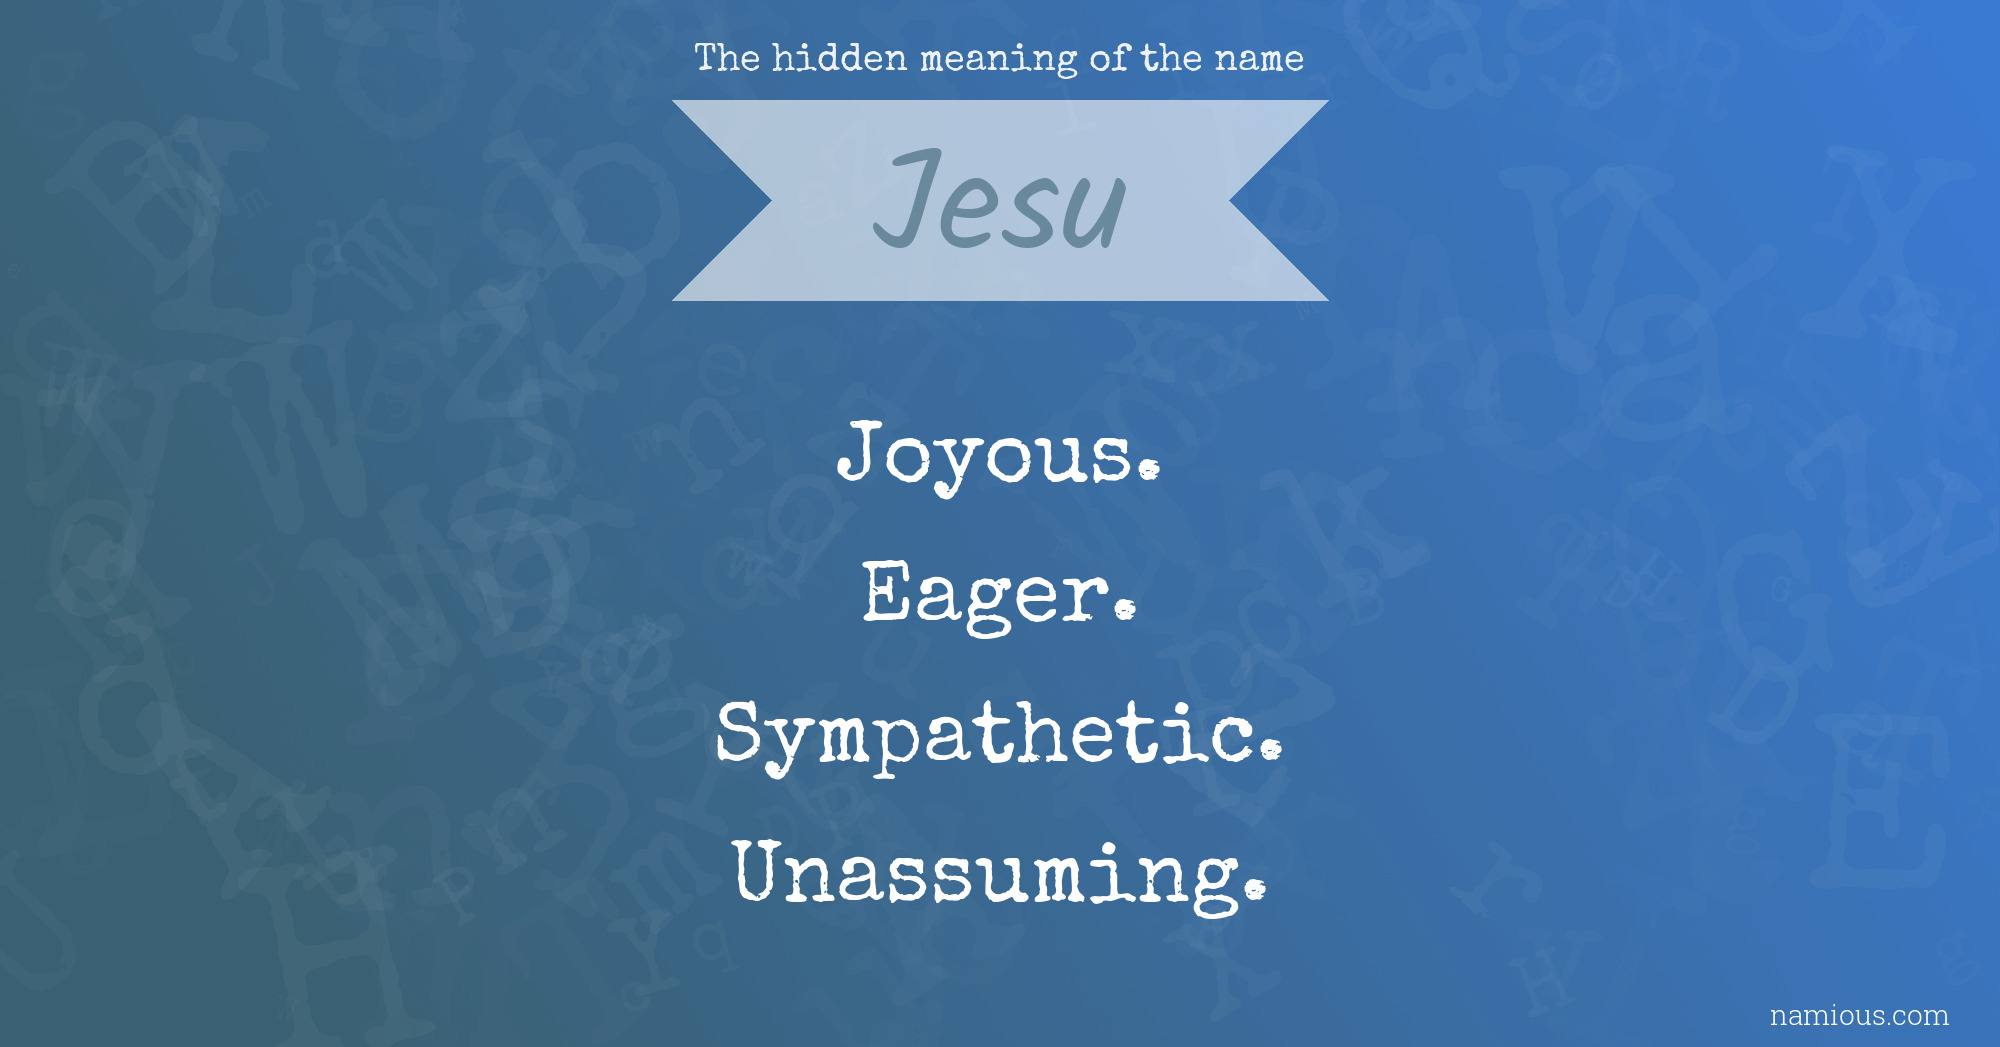 The hidden meaning of the name Jesu